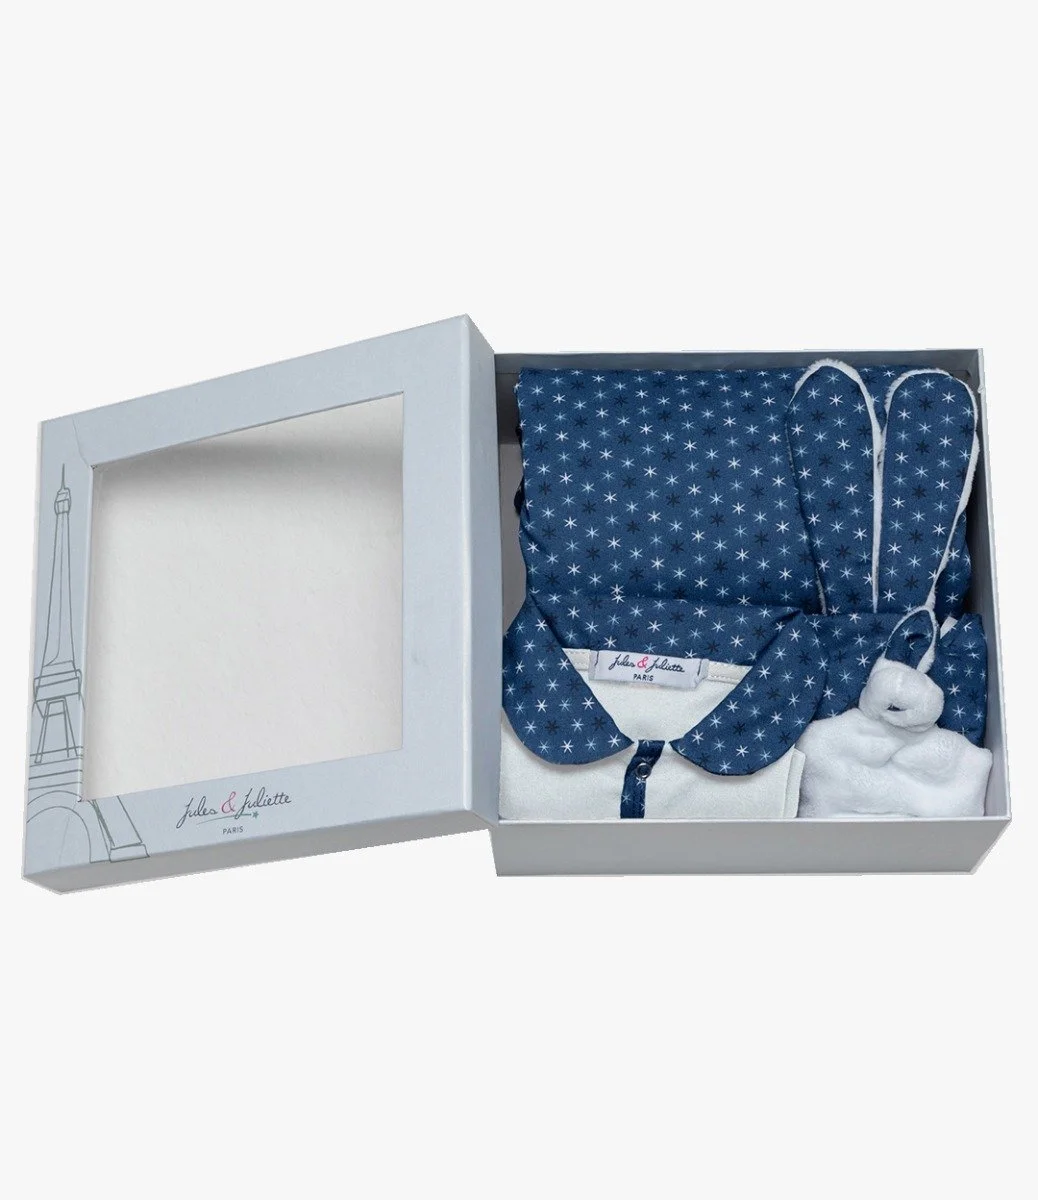 Astra Gift Set - 3 pieces by Jules & Juliette - Navy Blue